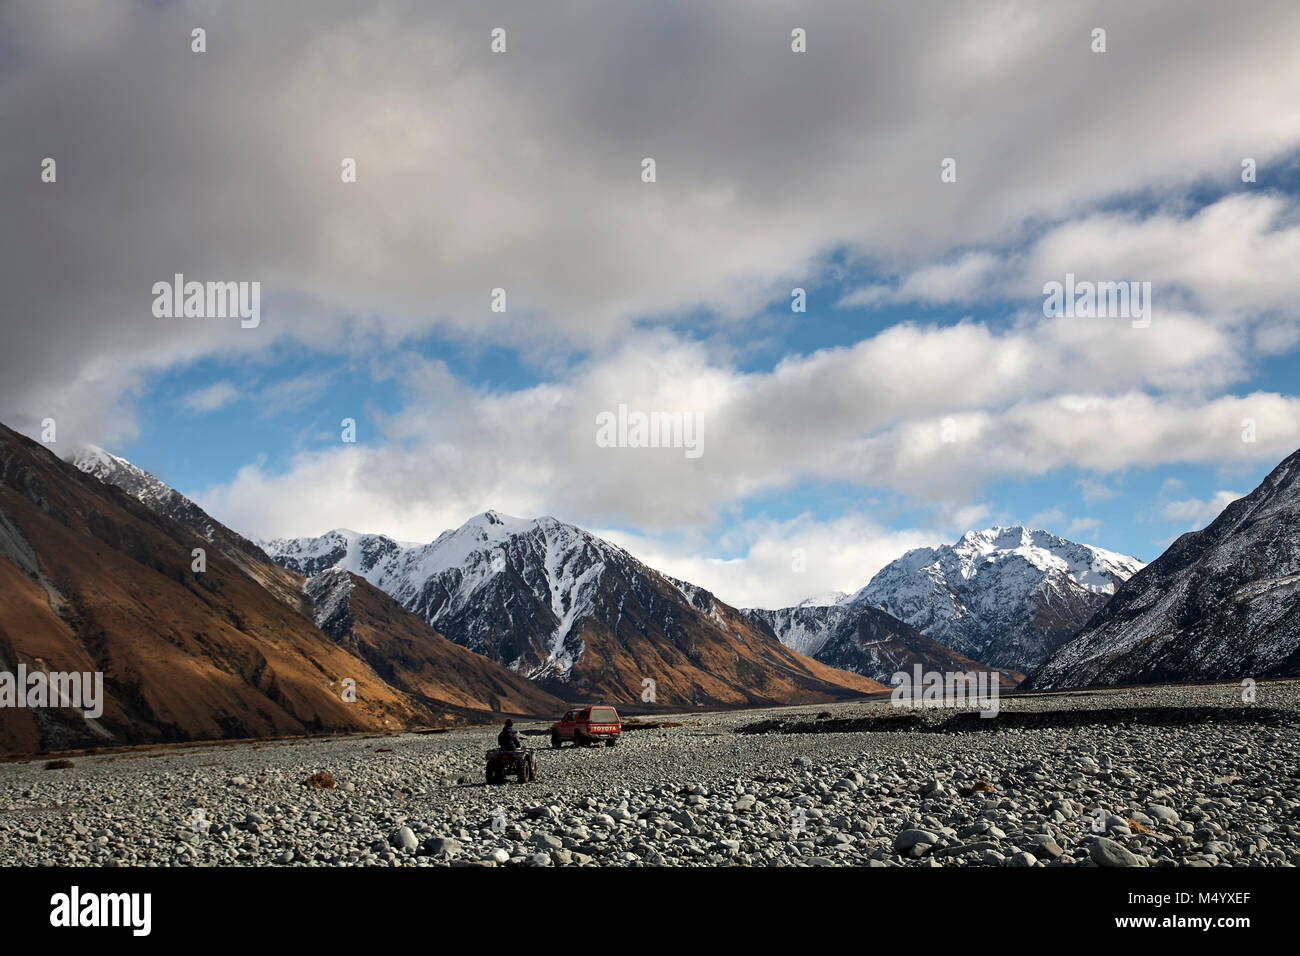 4x4 car and quadbike driving in rocky scenery with mountains during hunting trip, New Zealand Stock Photo